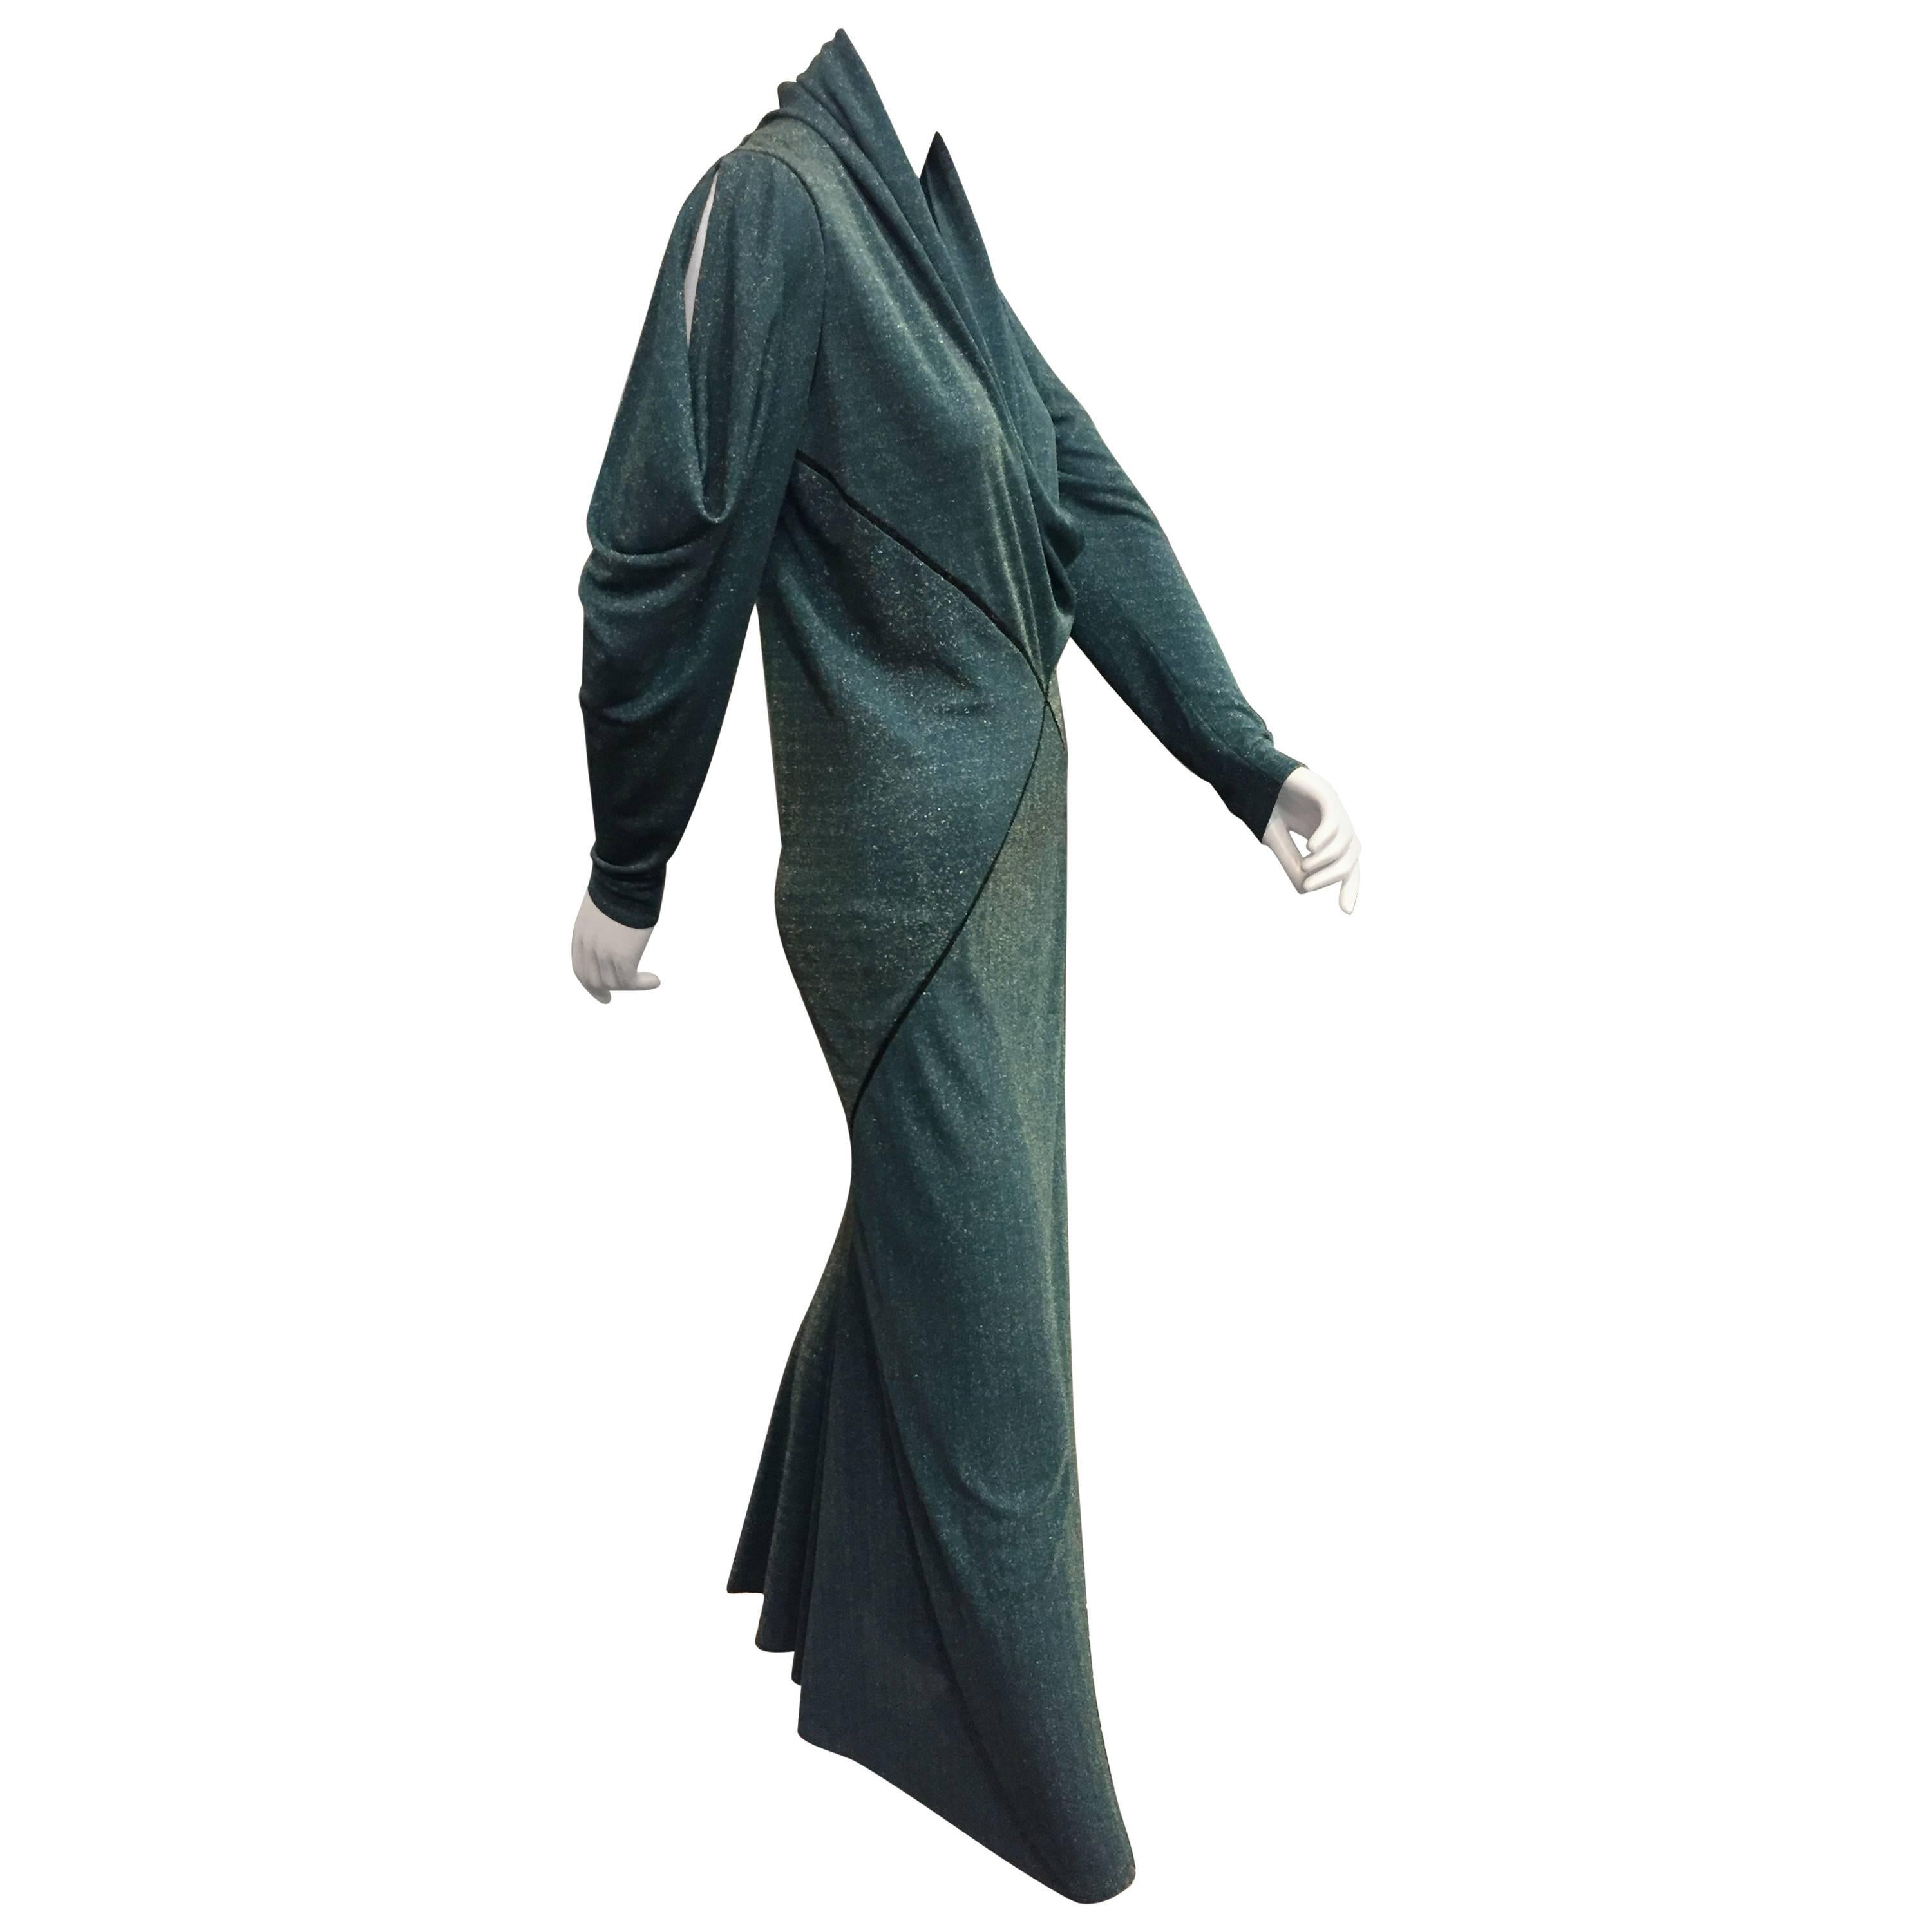 1980s Janice Wainwright Teal Lurex Jersey Gown w 1930s Inspired Bias Detailing